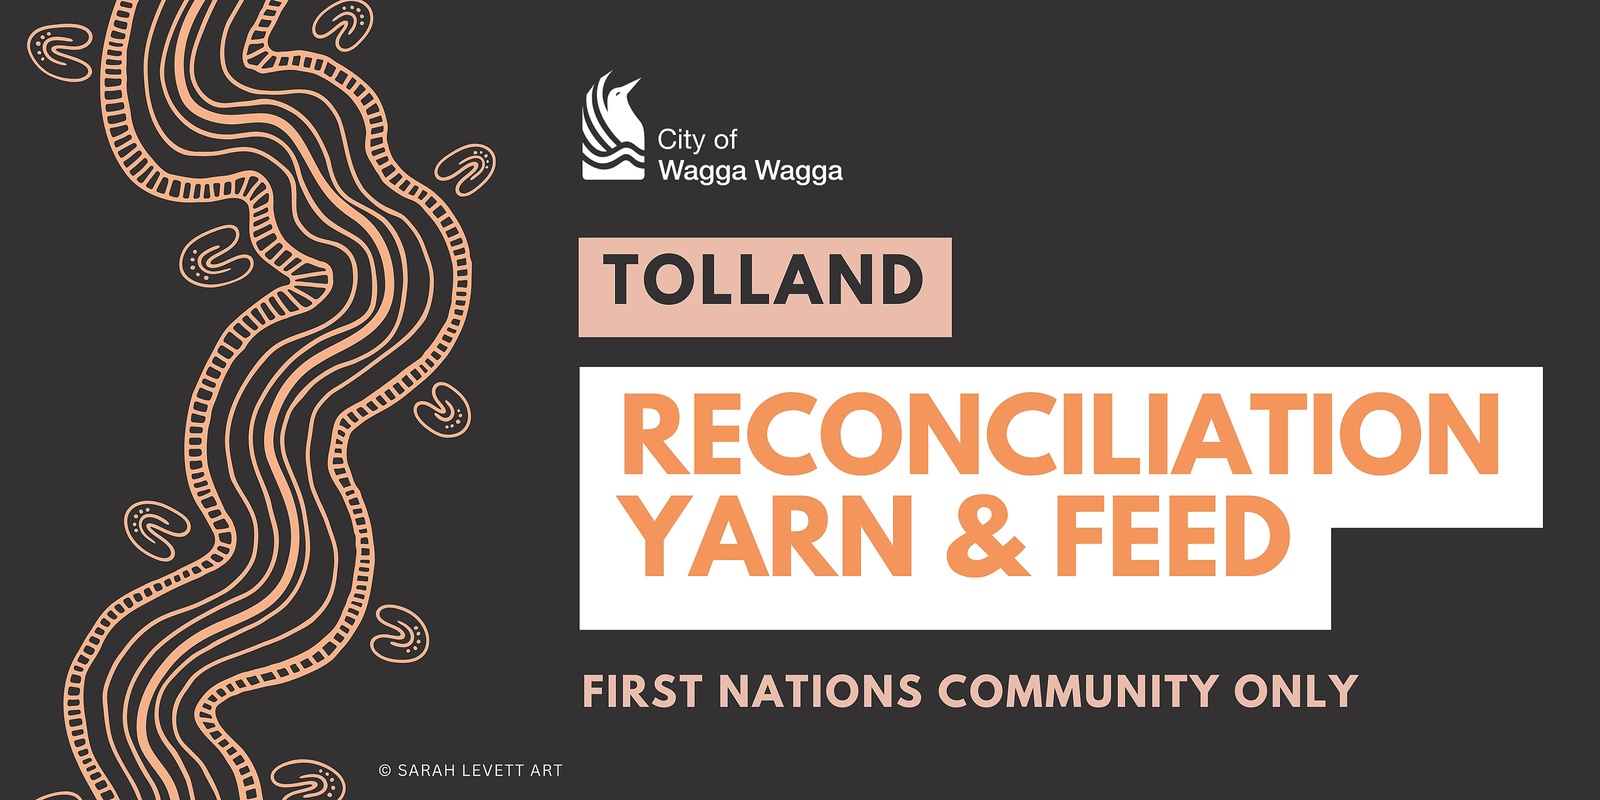 Banner image for Tolland Reconciliation Yarn & Feed with Wagga Wagga City Council